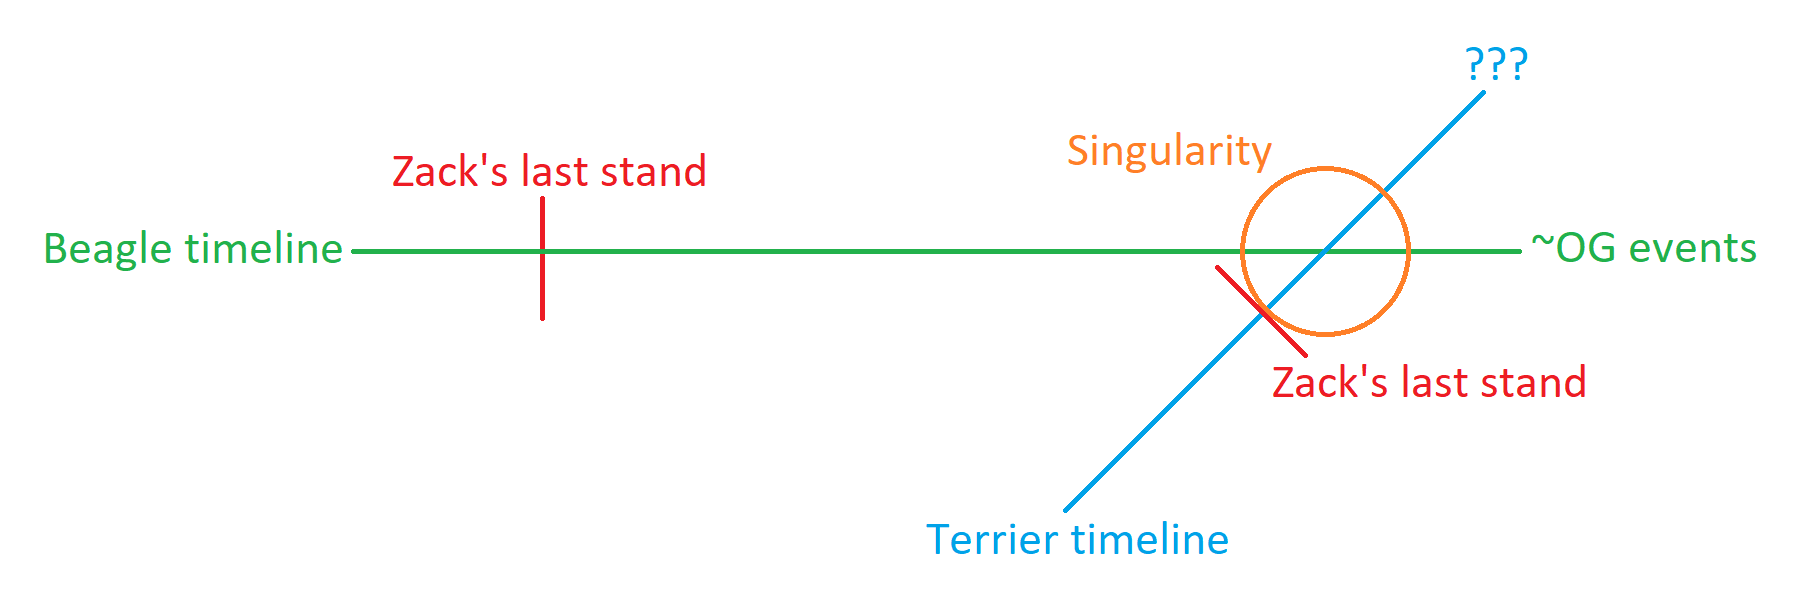 intersecting timelines diagram